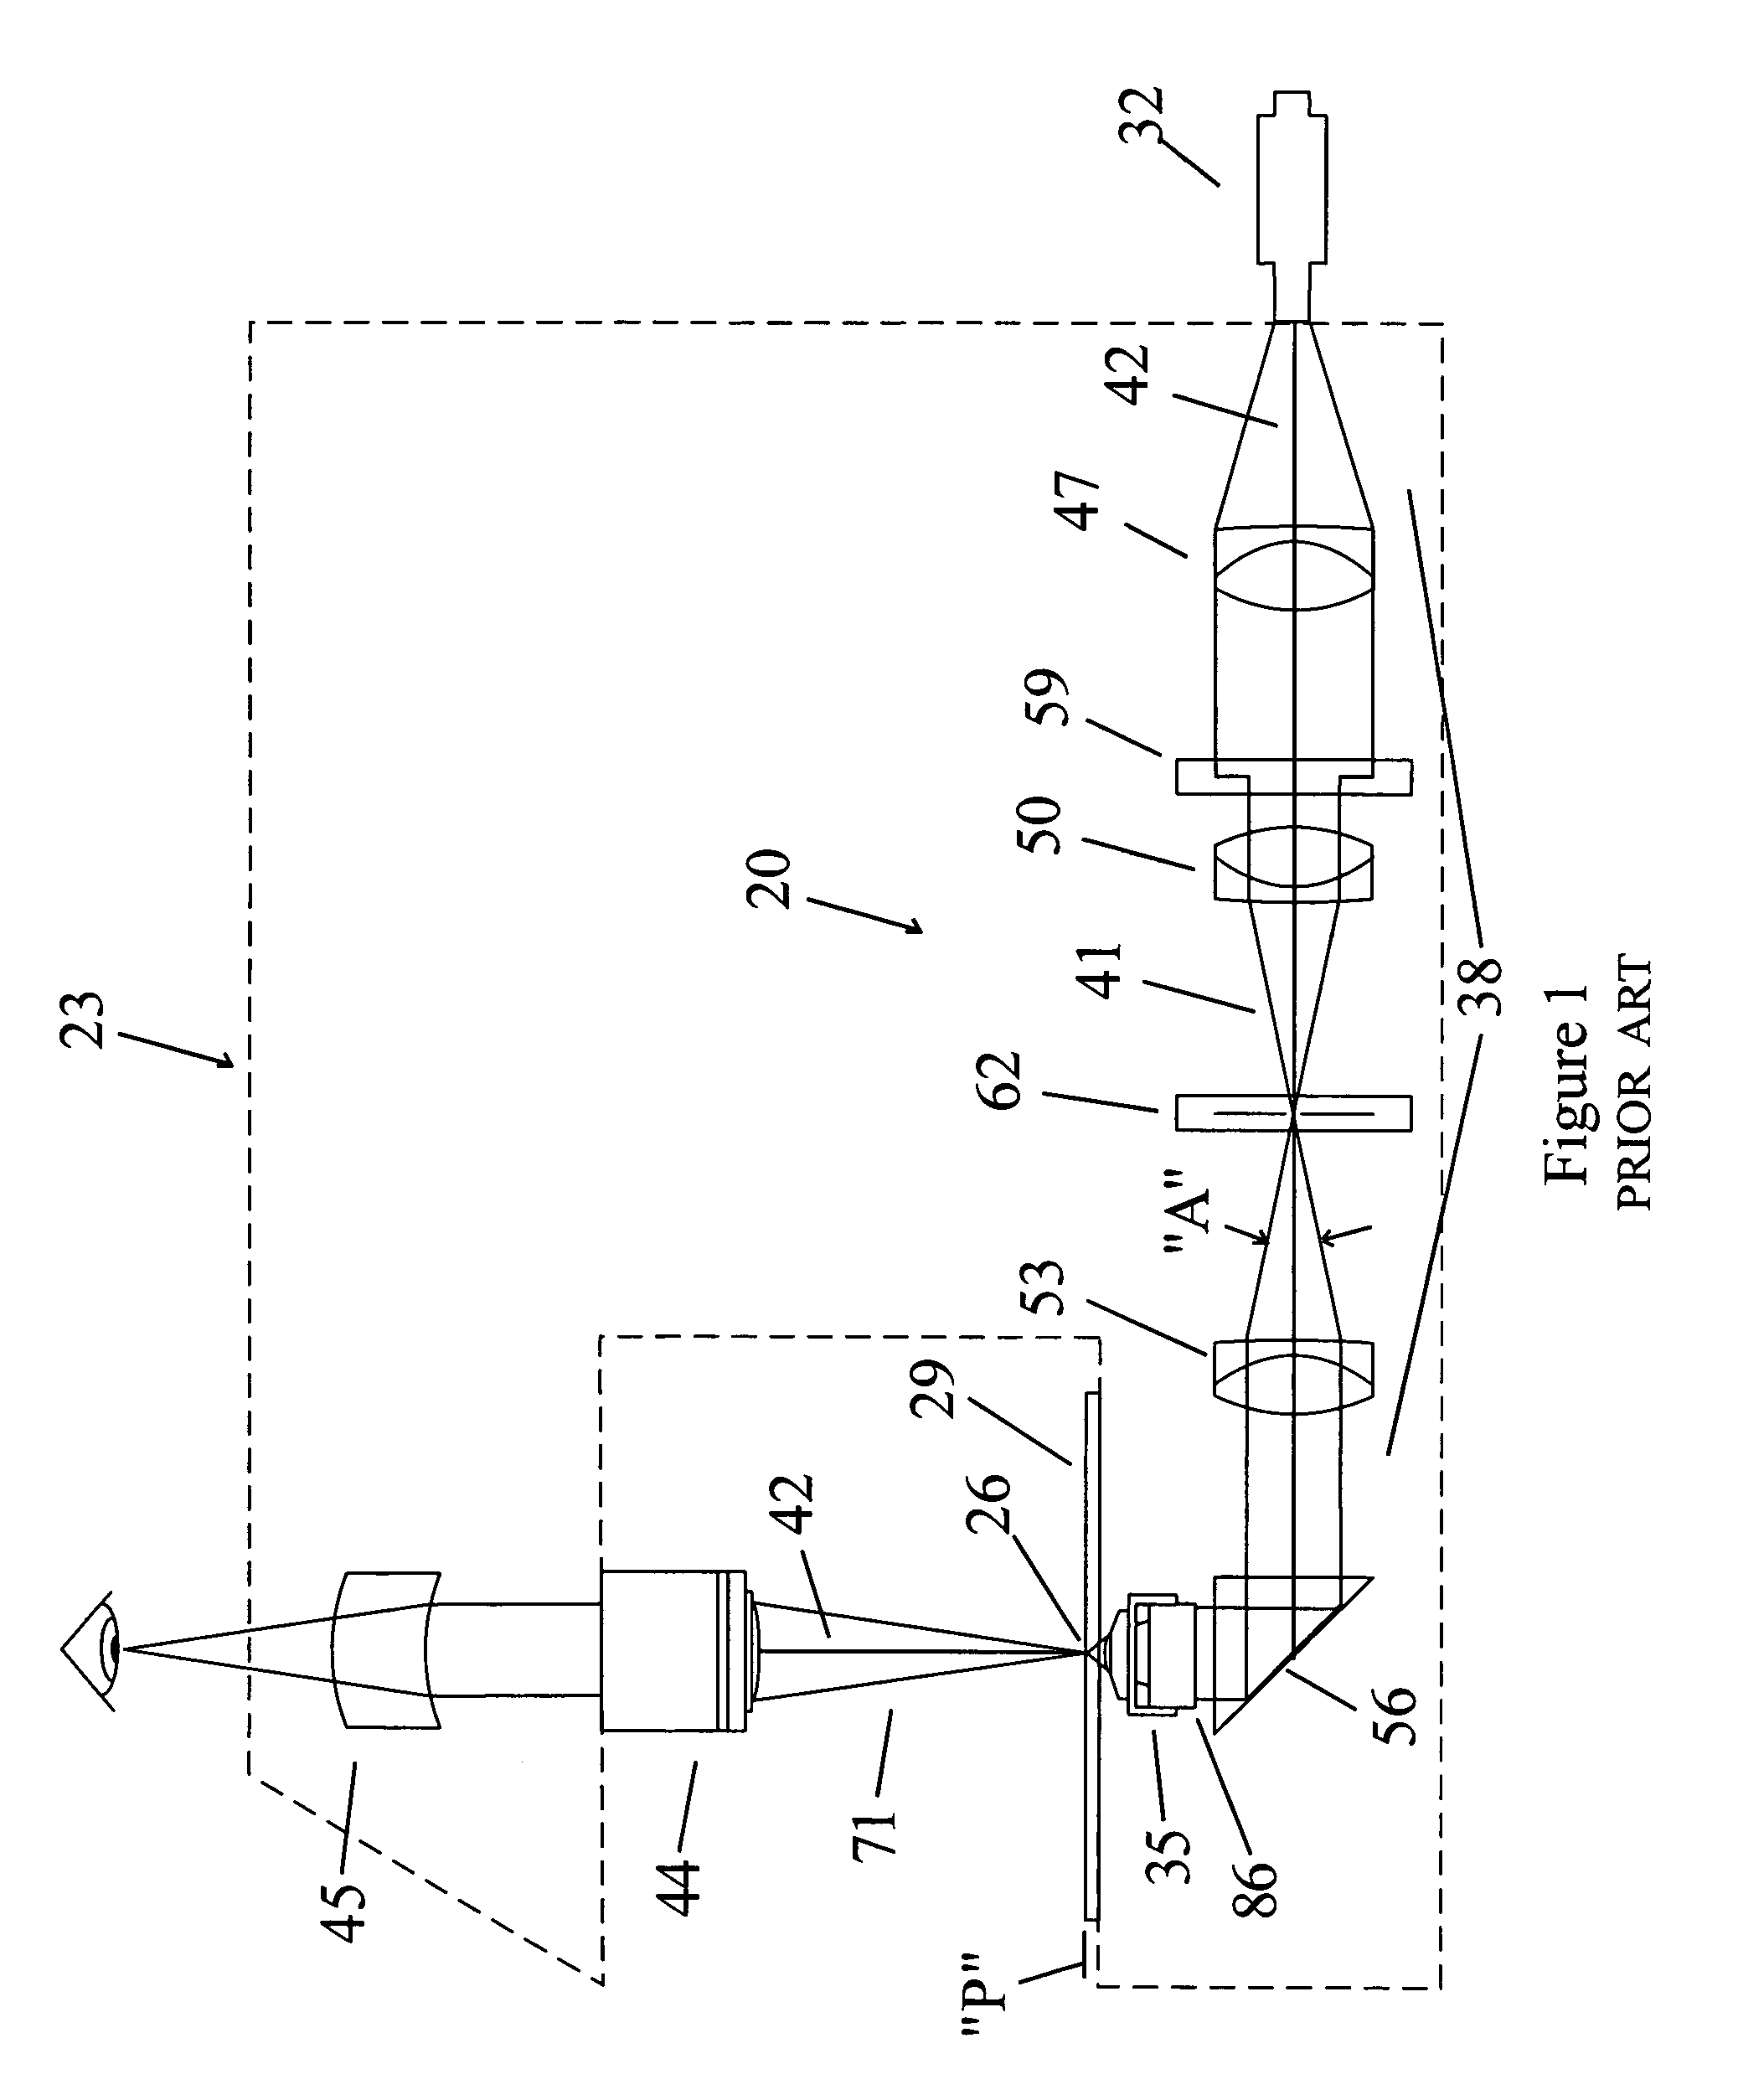 Light diffuser for optical microscopes replacing condenser with opal glass to produce near-koehler illumination